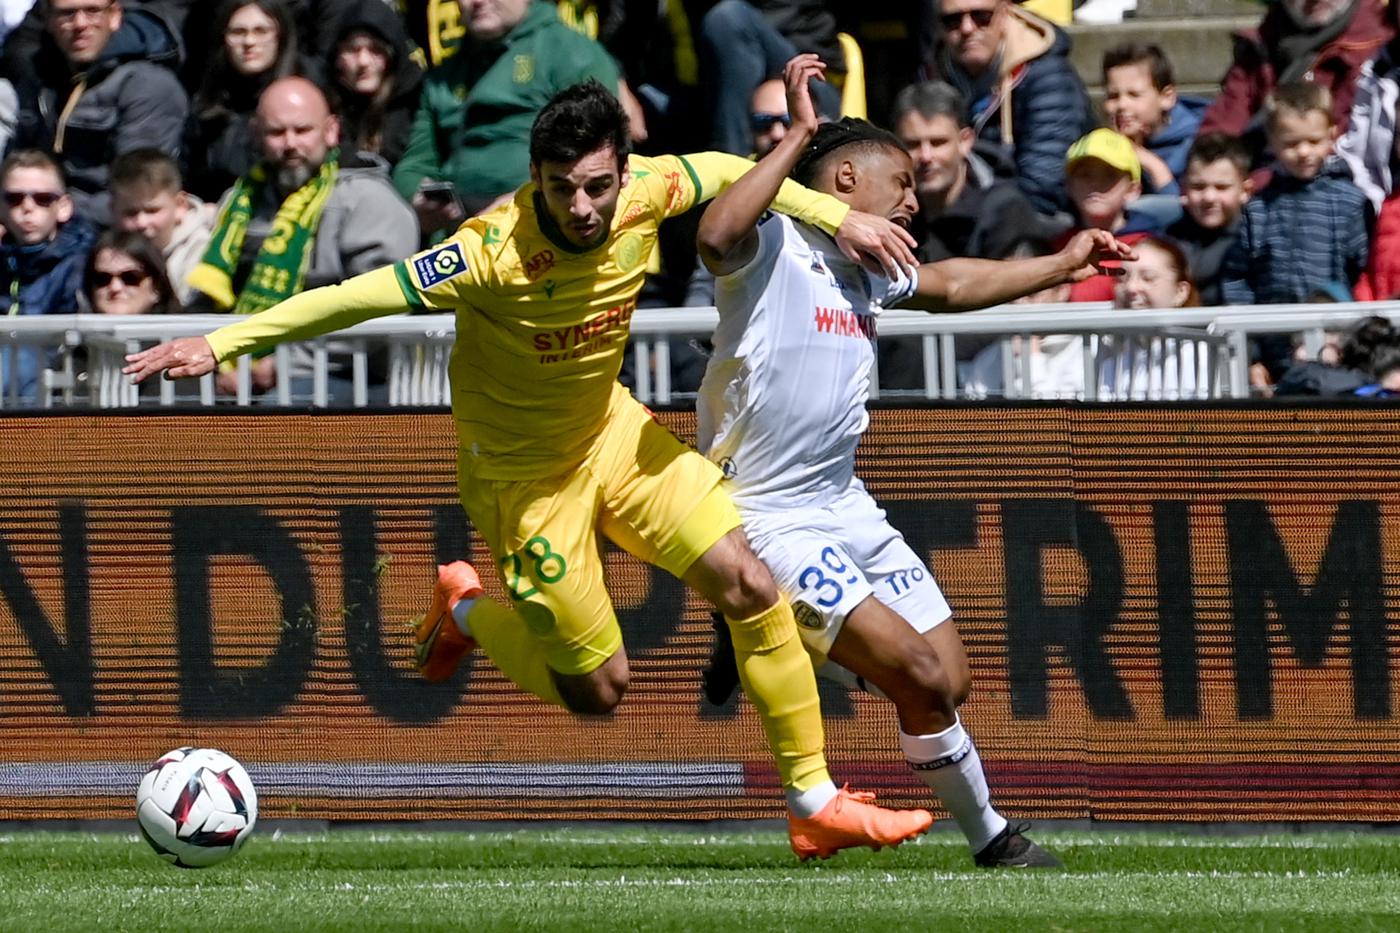 Nantes - Troyes - 2:2. French Championship, round 32. Match review, statistics.